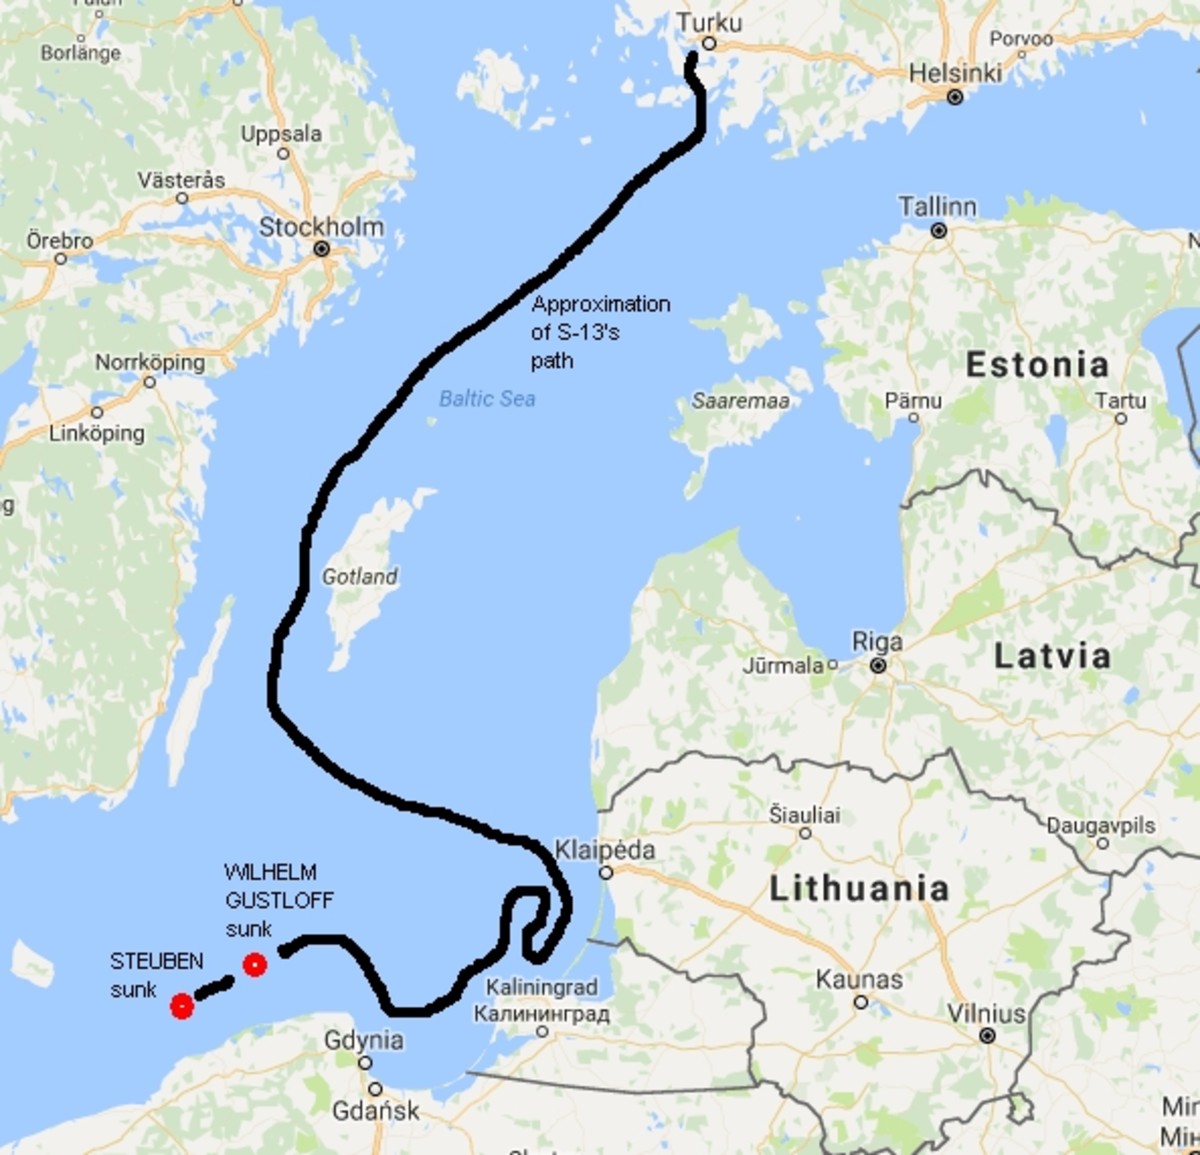 Approximations of the path taken by Soviet submarine S-13 and the sinkings of the liners Wilhelm Gustloff and Steuben (Jan - Feb 1945)